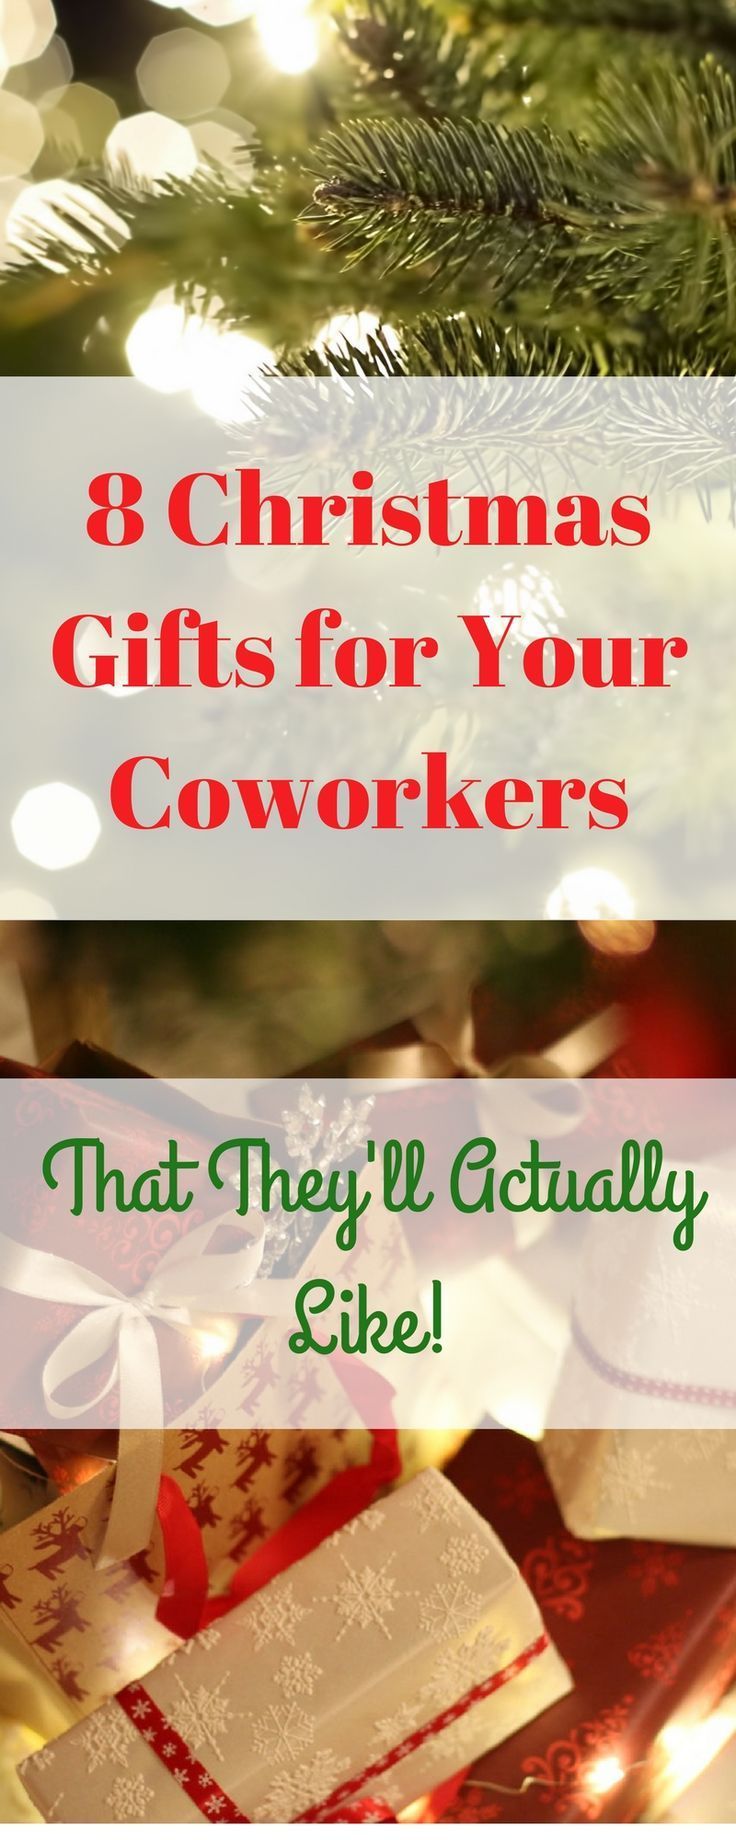 19 xmas gifts for coworkers ideas